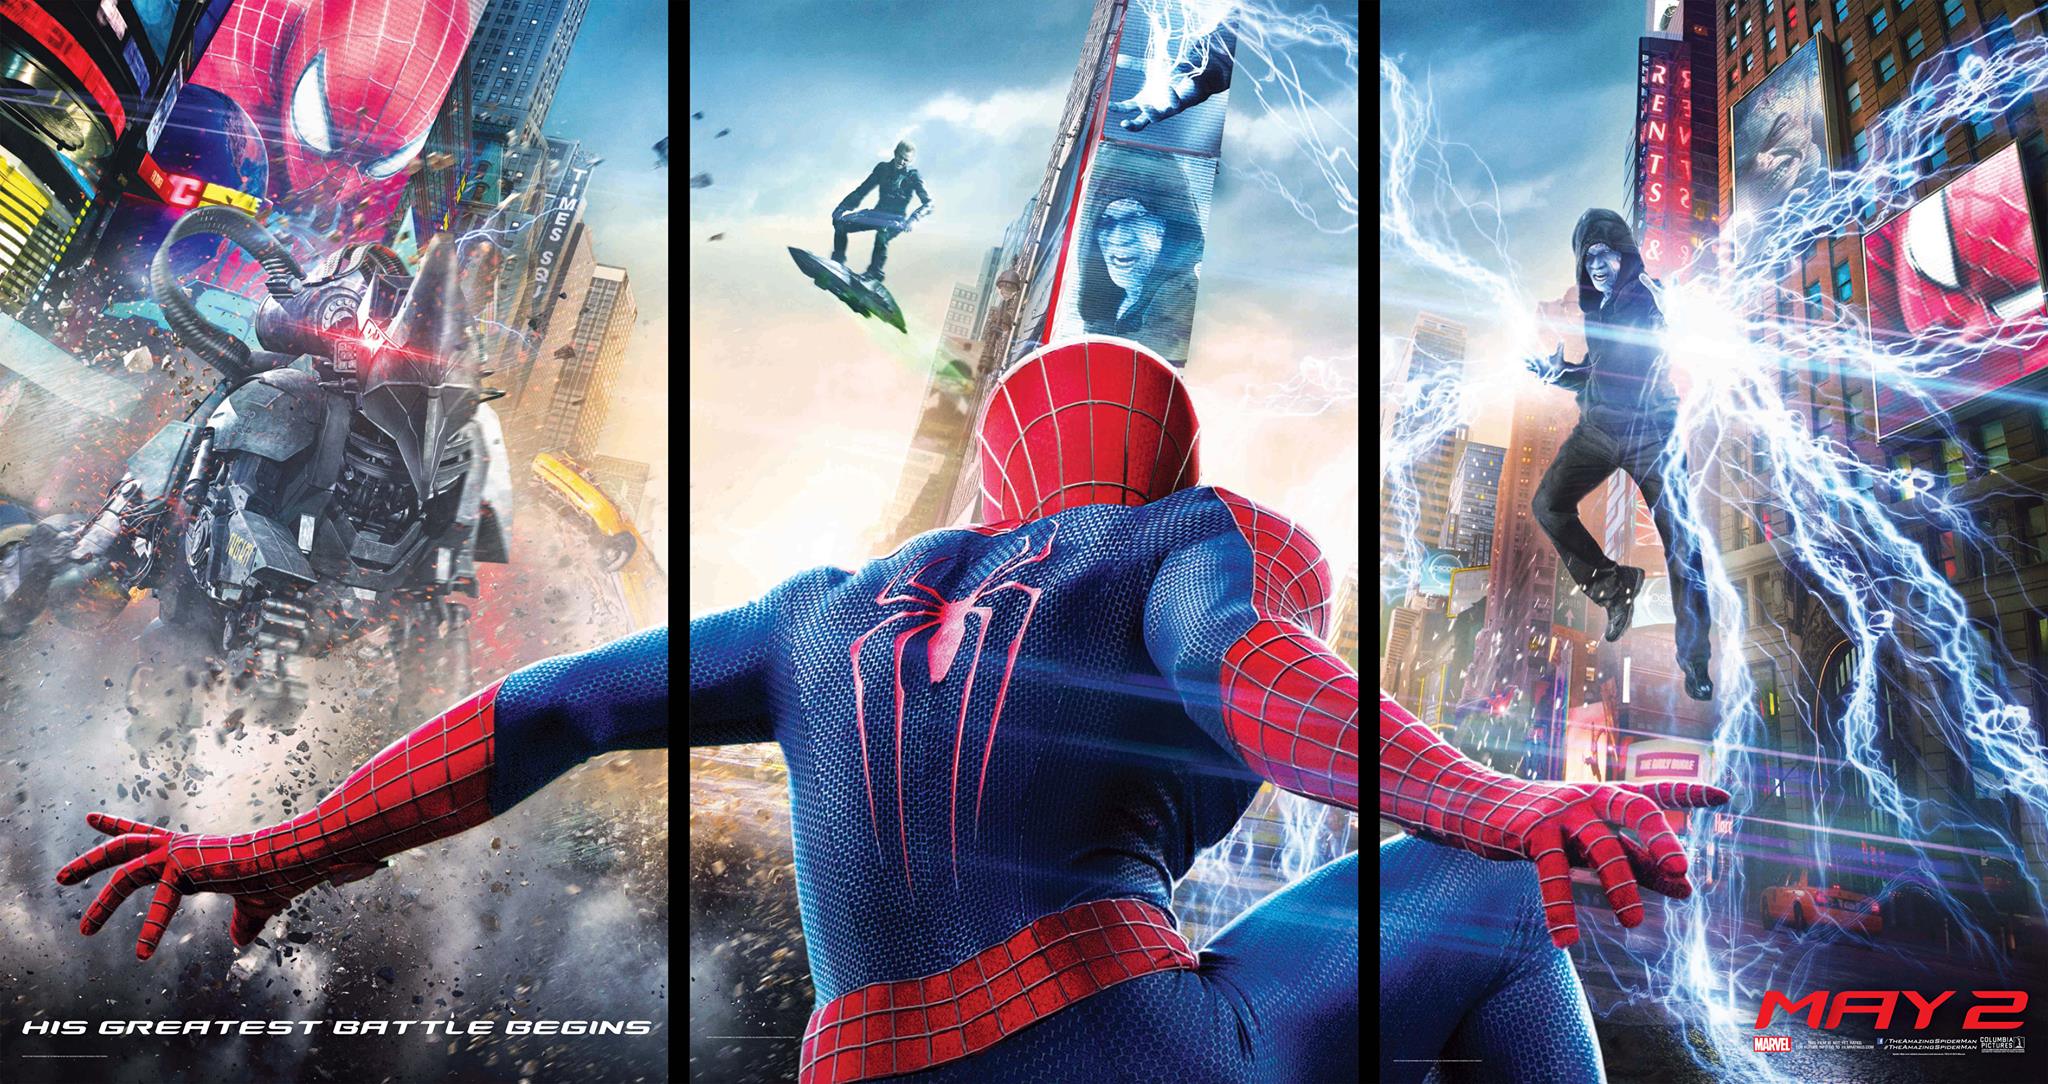 The Amazing Spider-Man 2 The Original Motion Picture